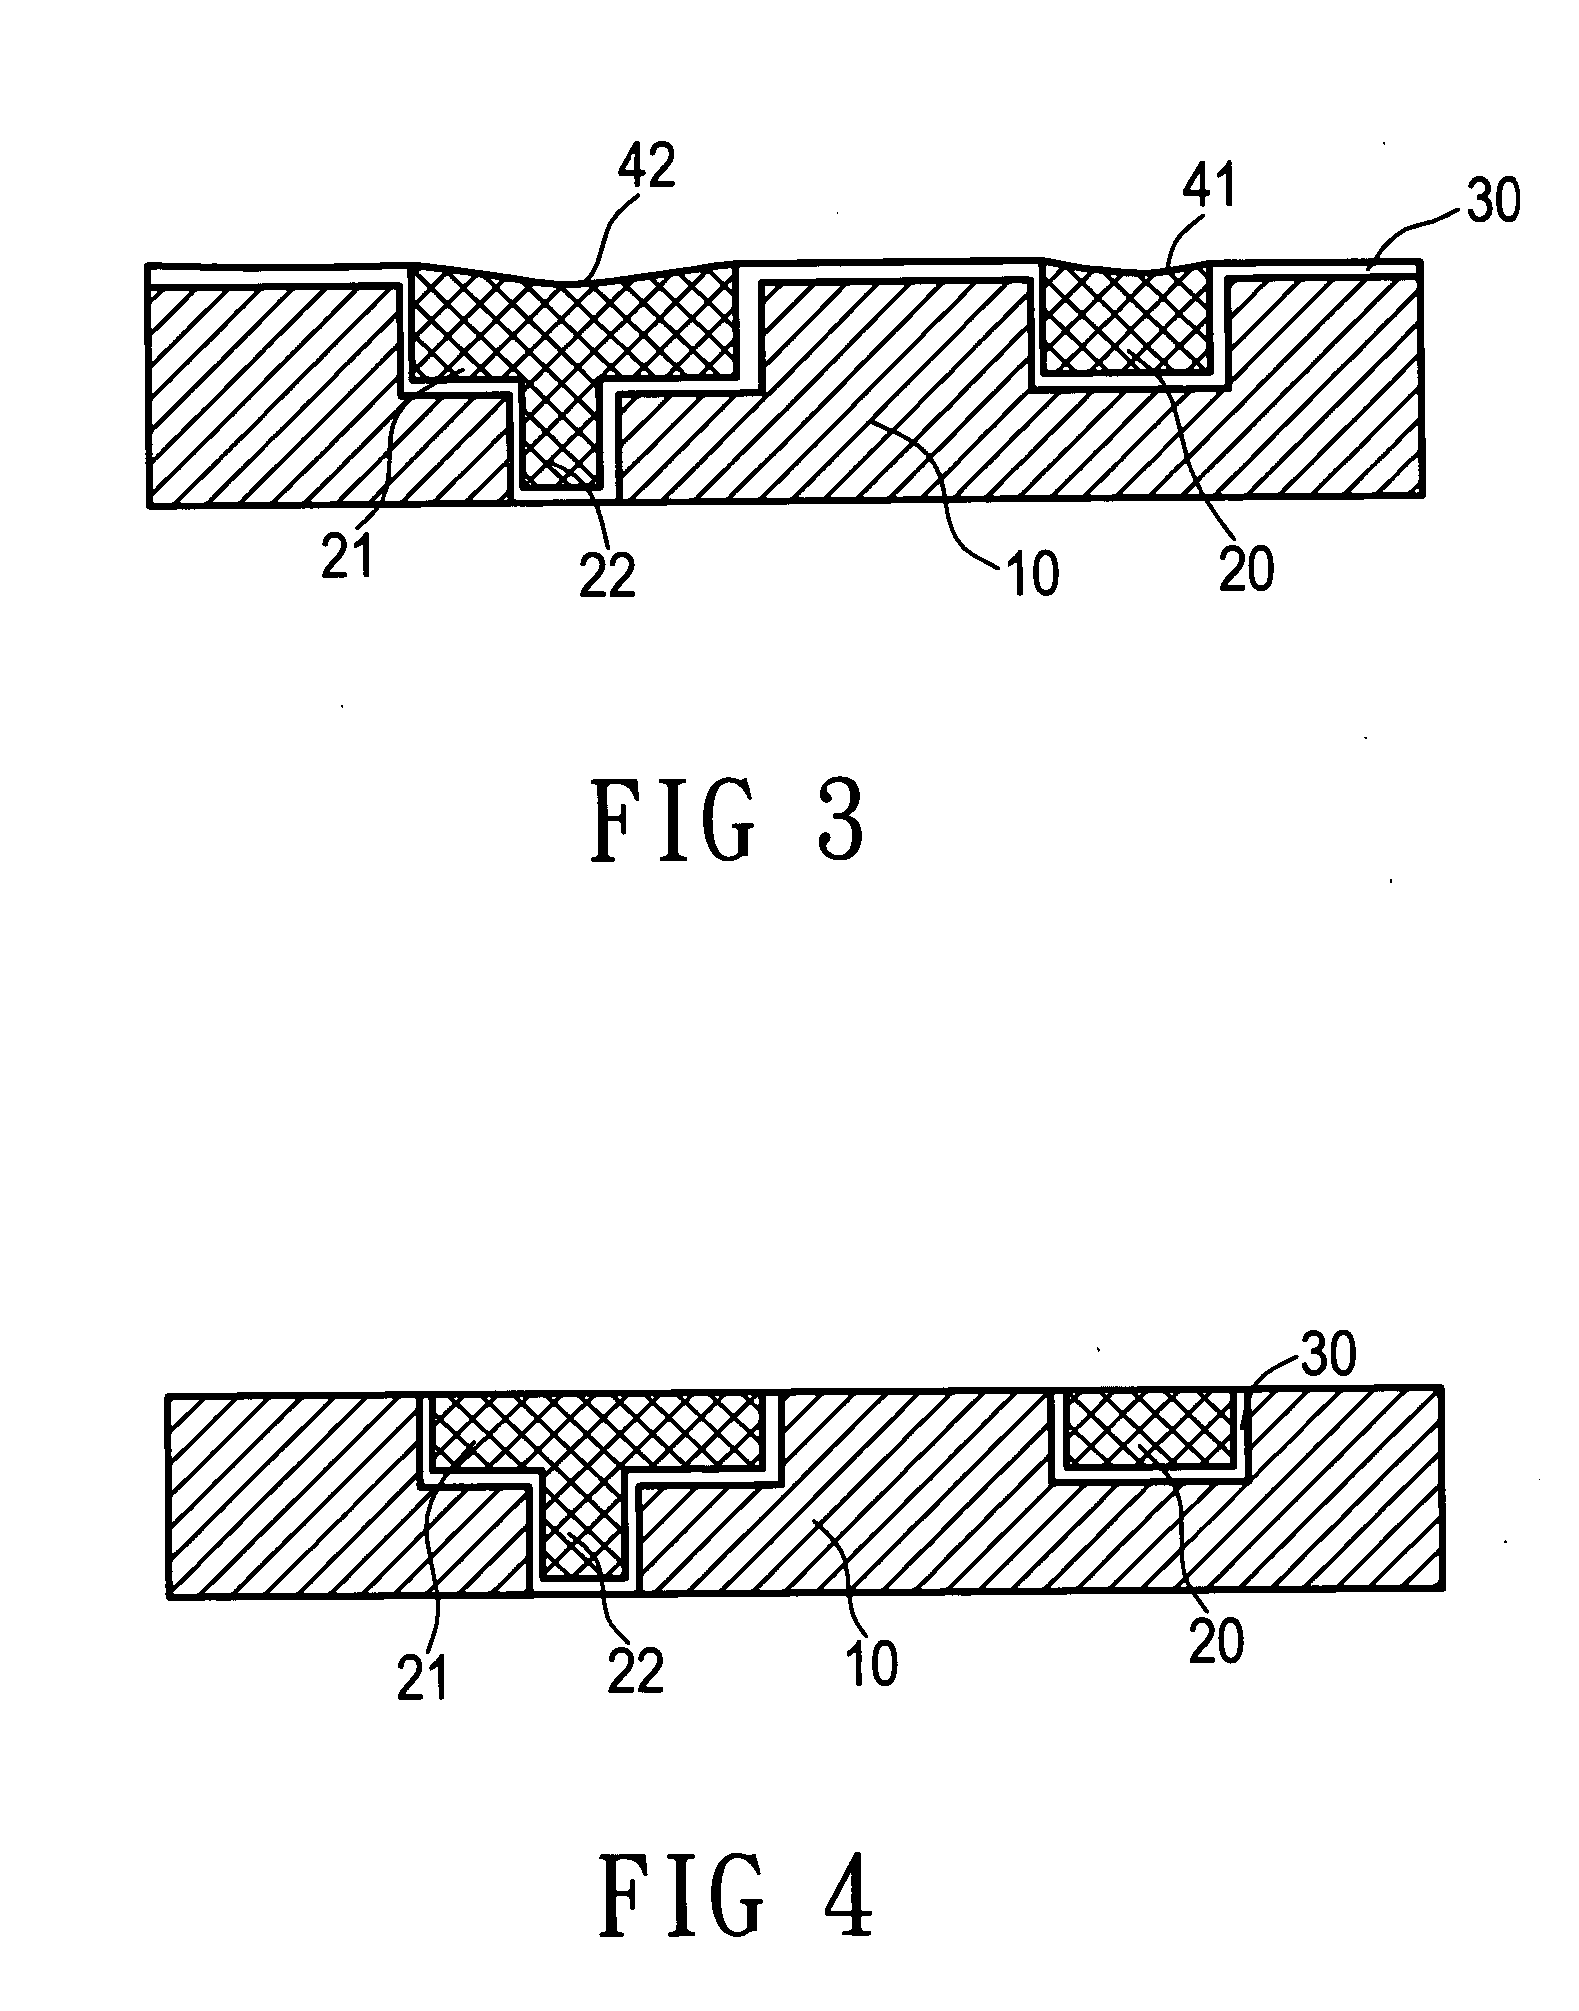 Slurry compositions for chemical mechanical polishing of copper and barrier films